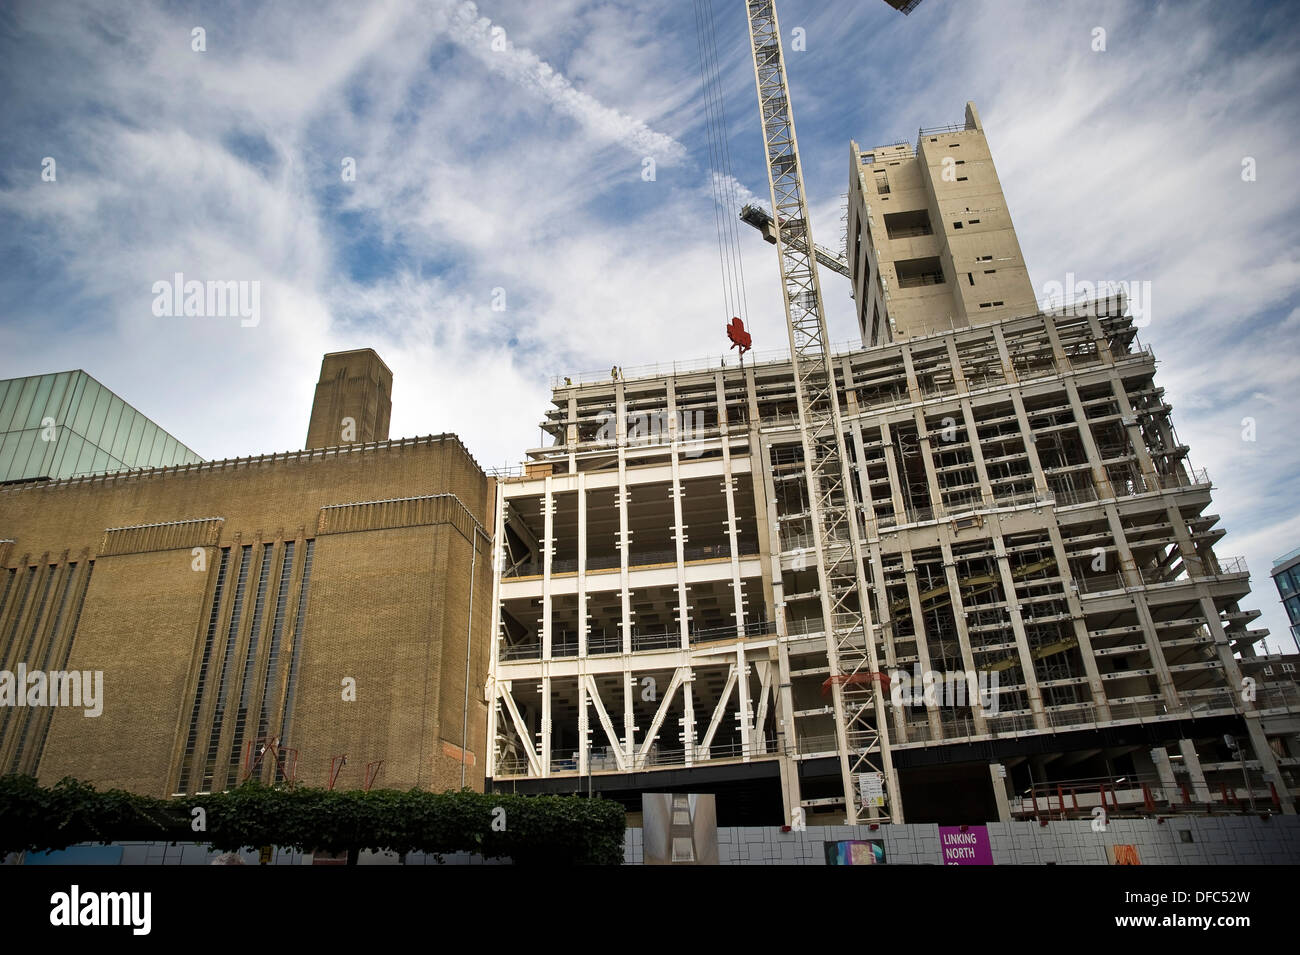 The new extension to Tate Modern under construction on the South Bank, London, UK Stock Photo